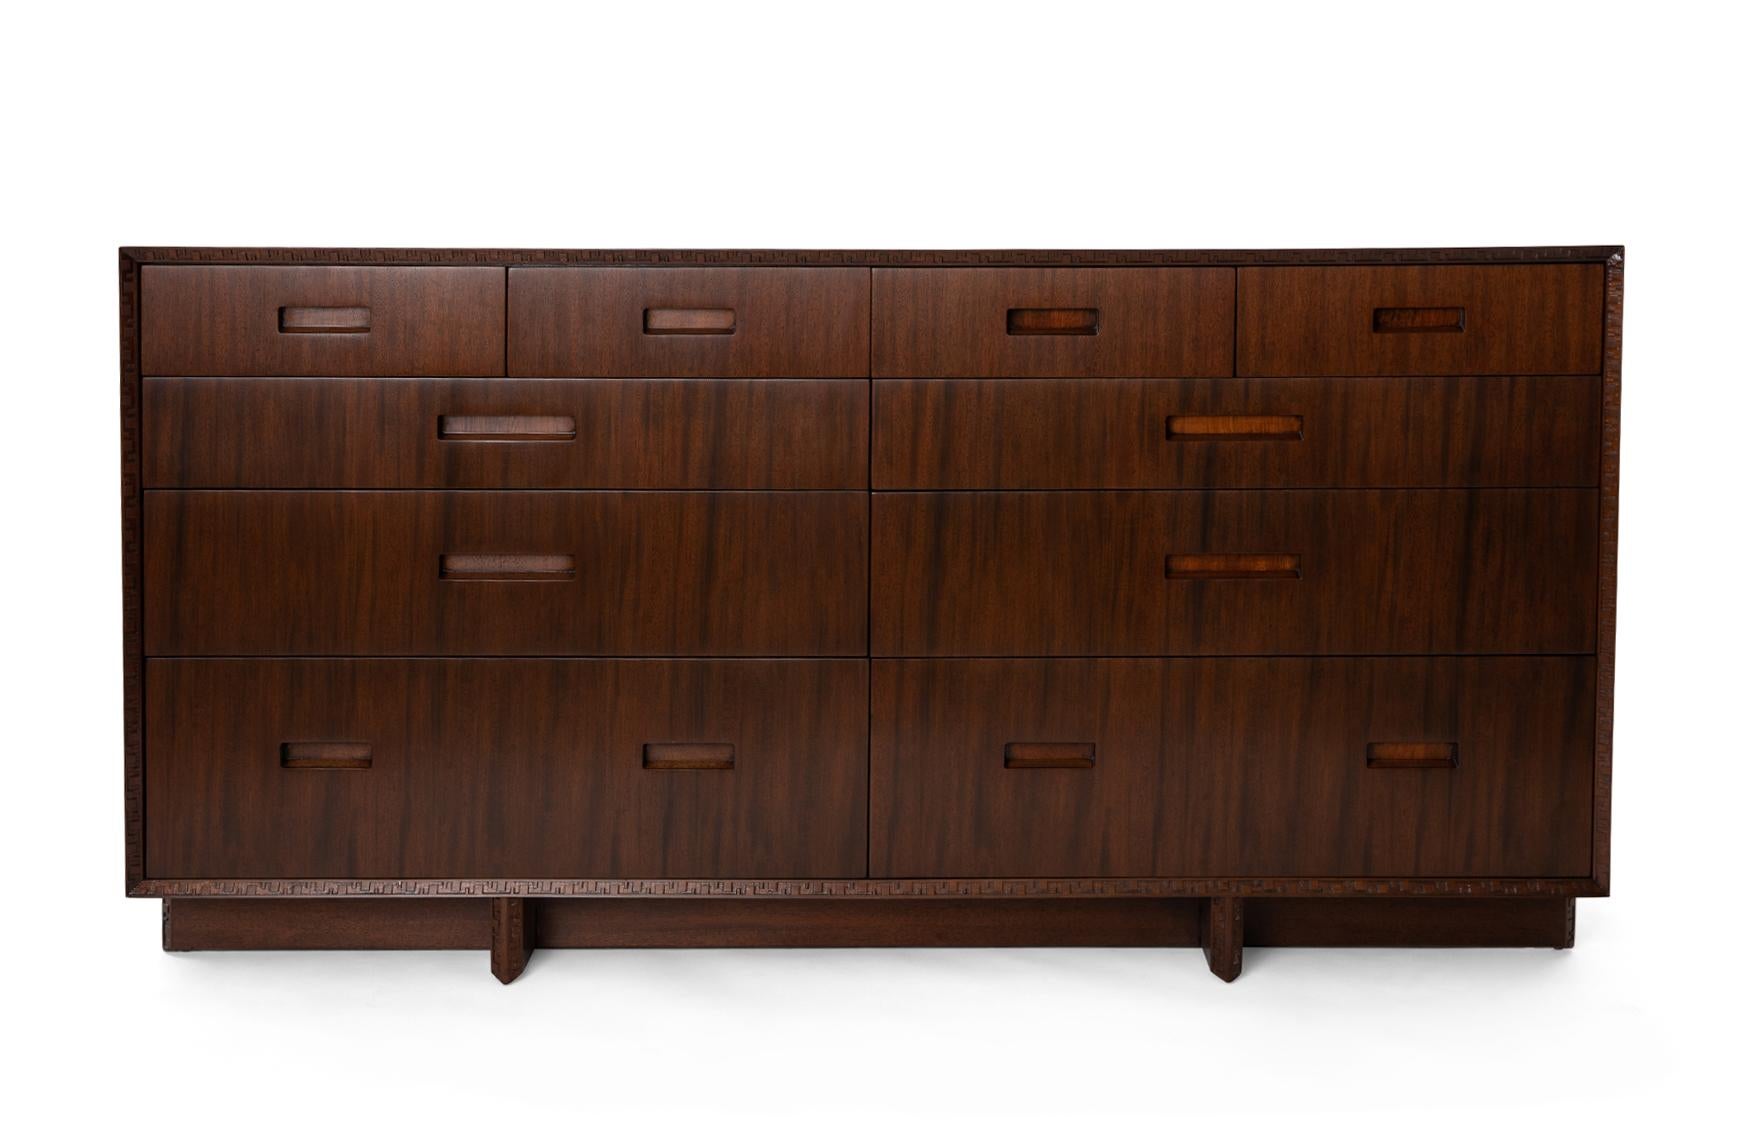 Sculpted mahogany ten drawer dresser, circa mid 1950s. This example has the inset Talliesin detailing on the trim and legs and has been masterfully refinished.